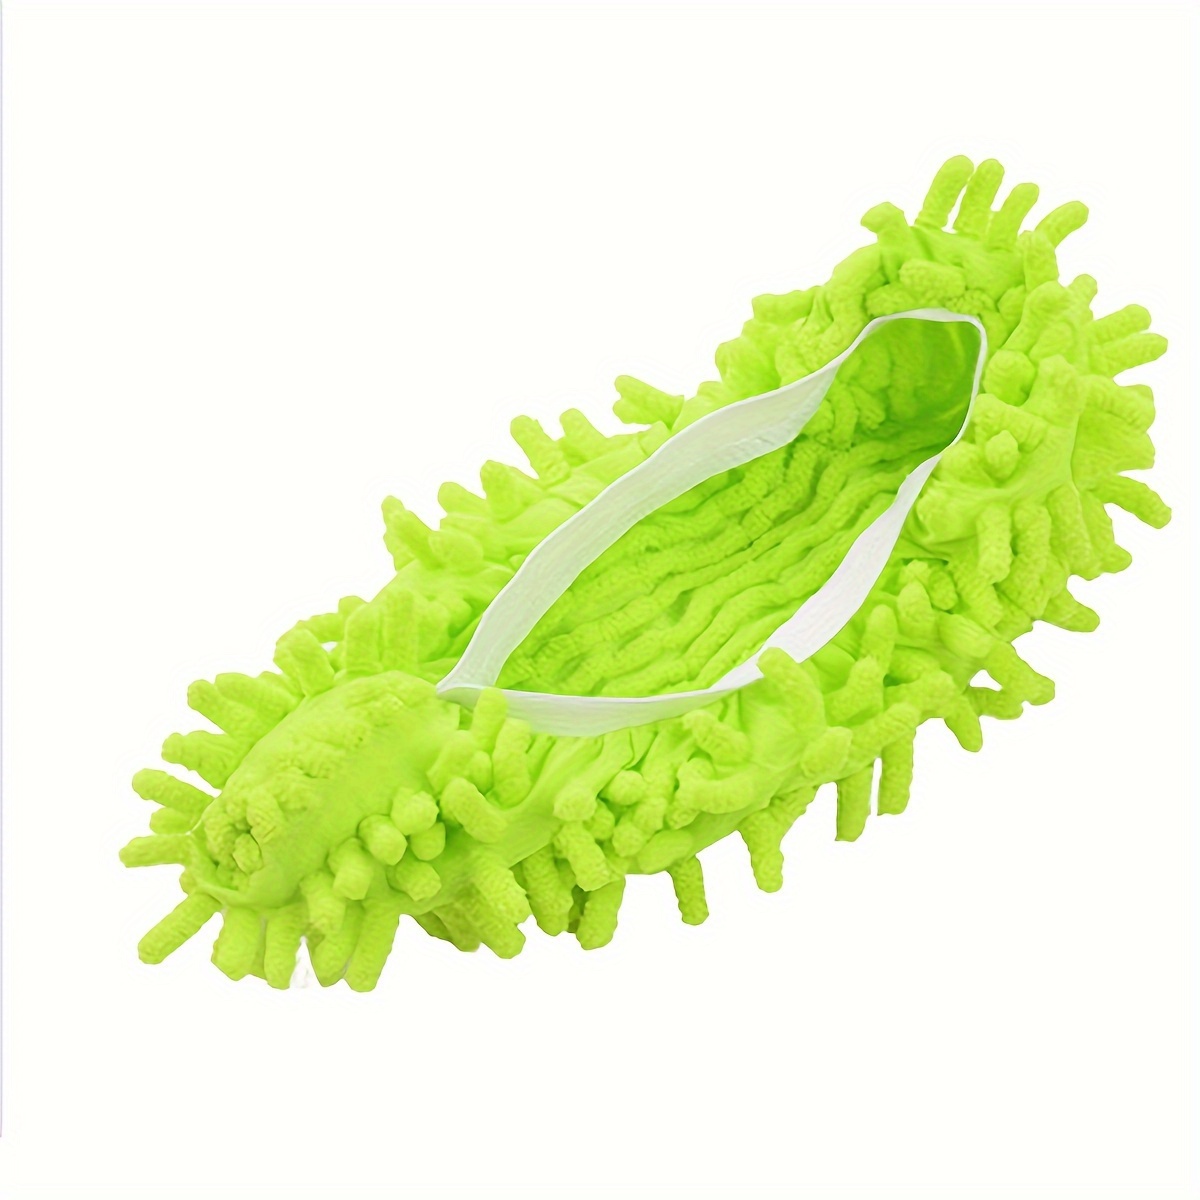 Mop Slippers Reusable Floor Cleaning Wearable Shoes Sandals Cleaning Tools